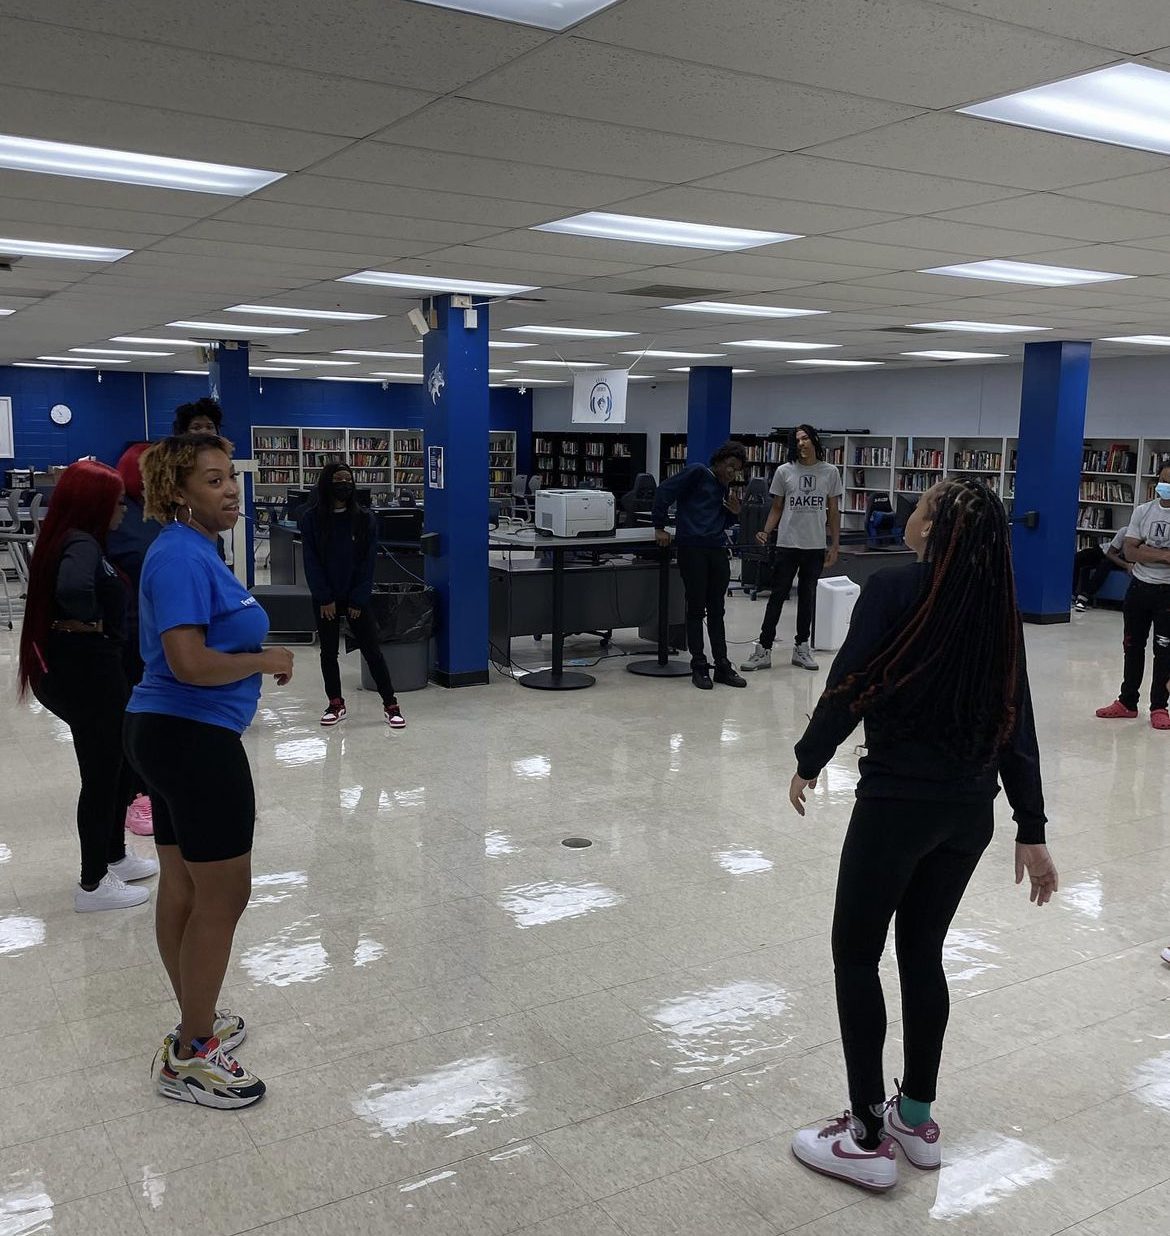 Students are spread out as they learn new choreography from their dance instructor. The students are wearing comfortable clothing. Students who are visible are wearing Baker graphic tees and jogging pants. The instructor leads the class as she wears a bright blue shirt and black shorts.